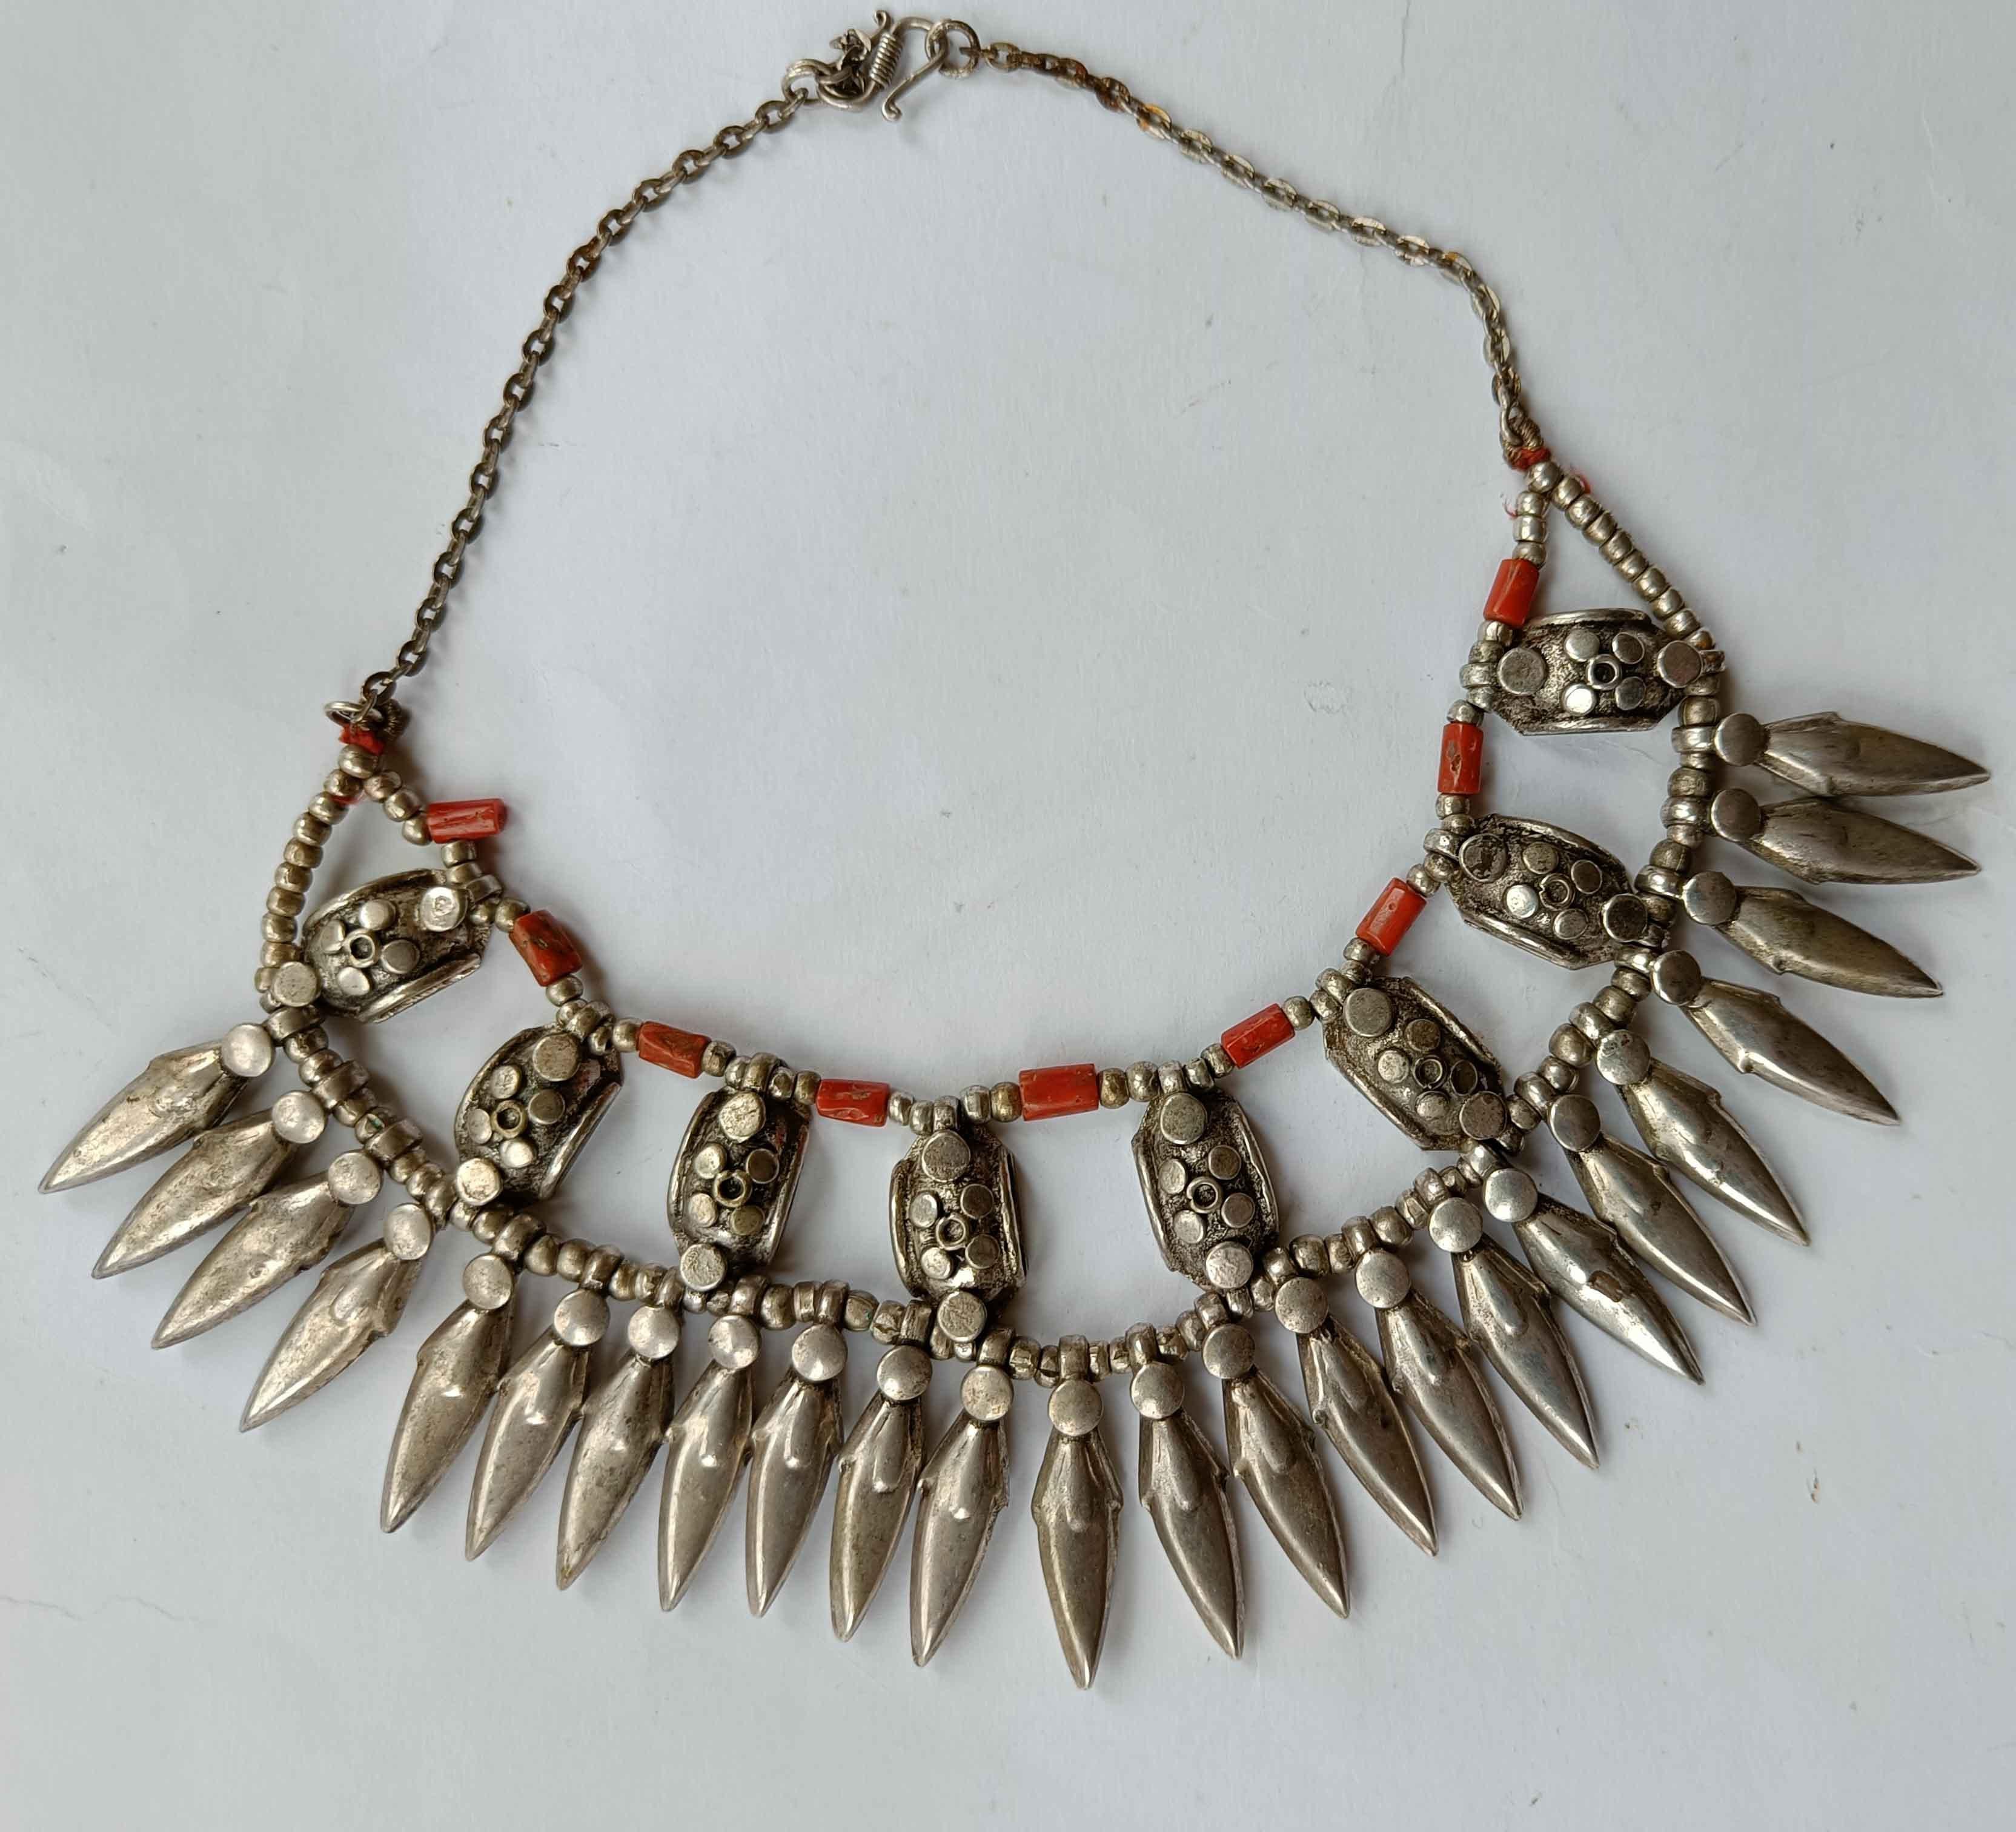 Nice Vintage Asian Indian ethnic Tibetan  Silver coral Necklace Ladakh  

Typical Ladakh ethnic Himalayan Tibetan Traditional necklace   

850 grade silver with coral beads 

Condition Good



 
 
